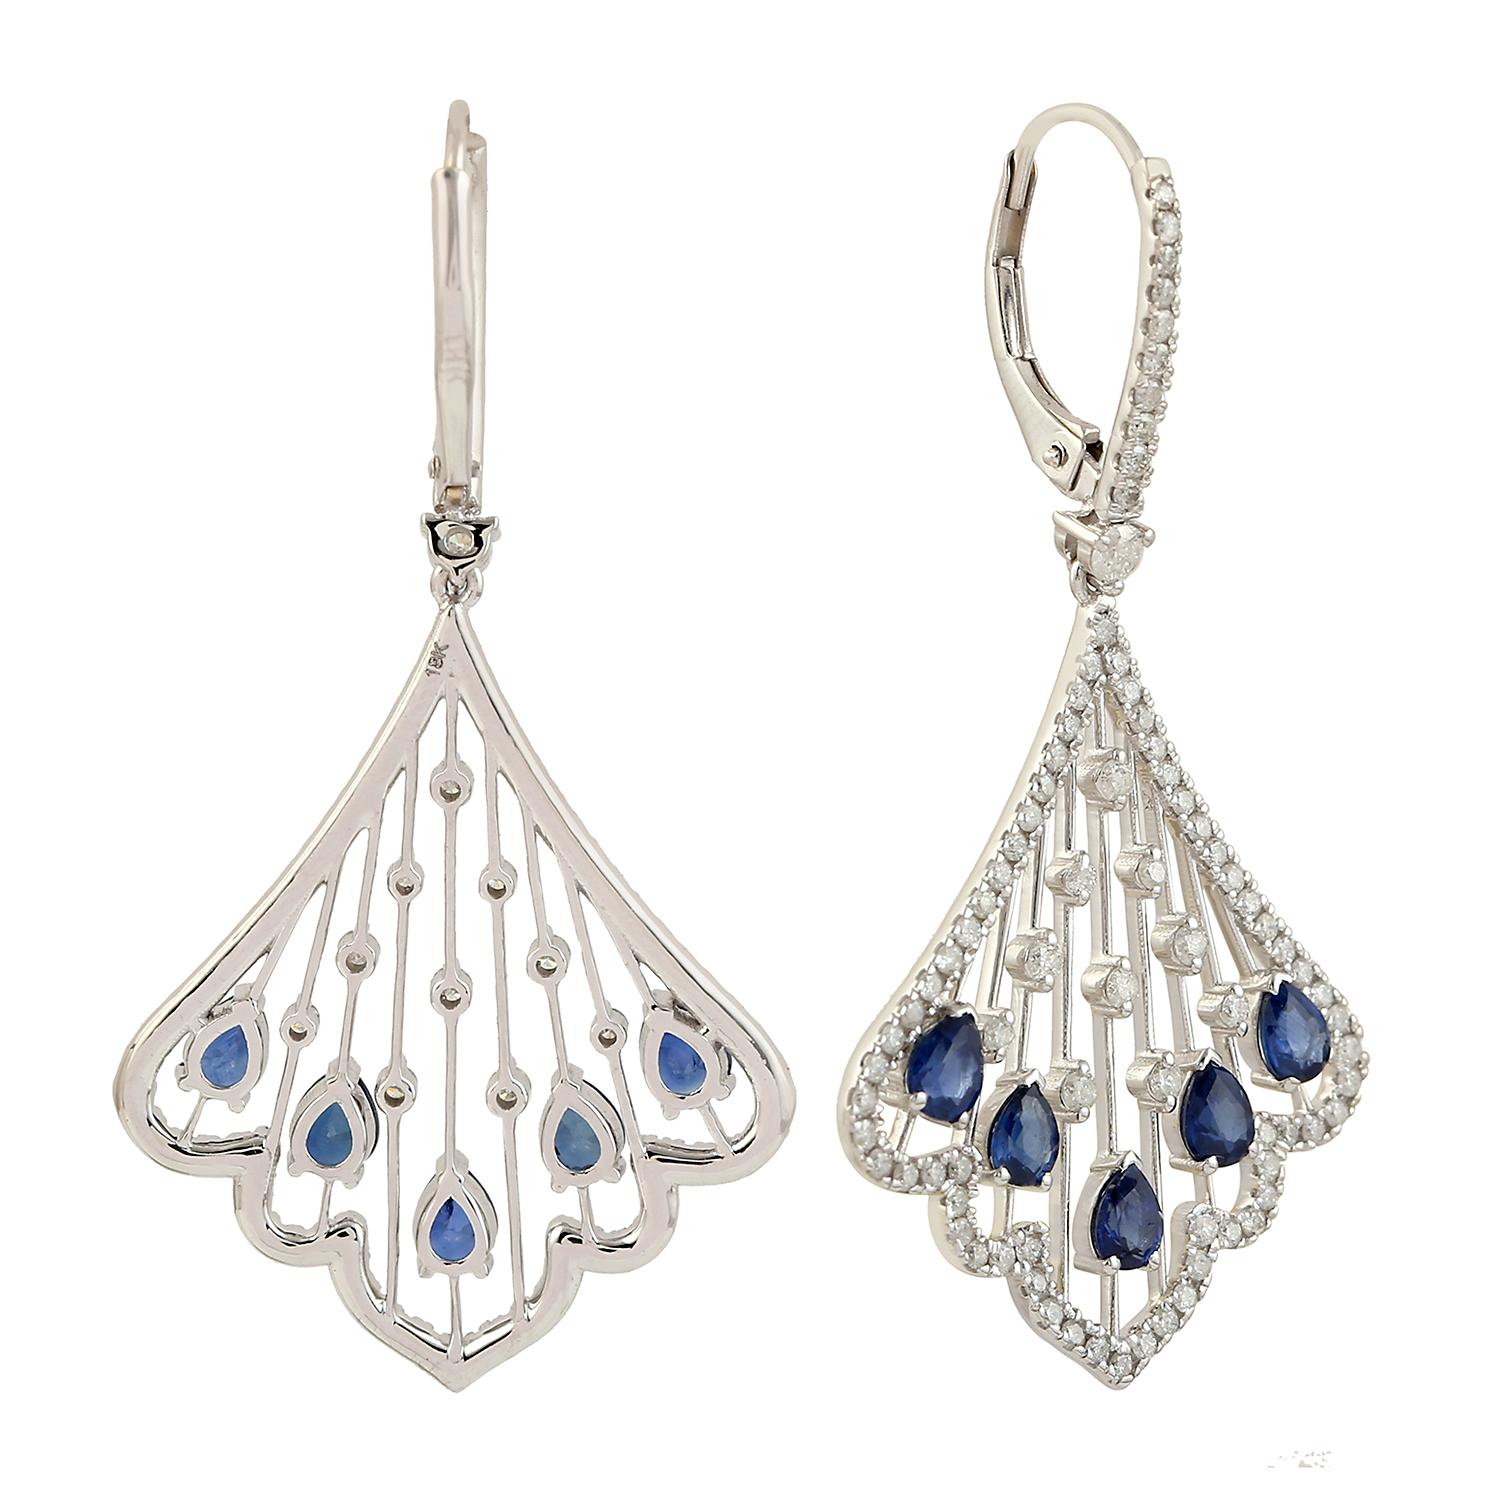 Mixed Cut Sapphire & Diamonds Dangle Earrings Made In 18k White Gold For Sale